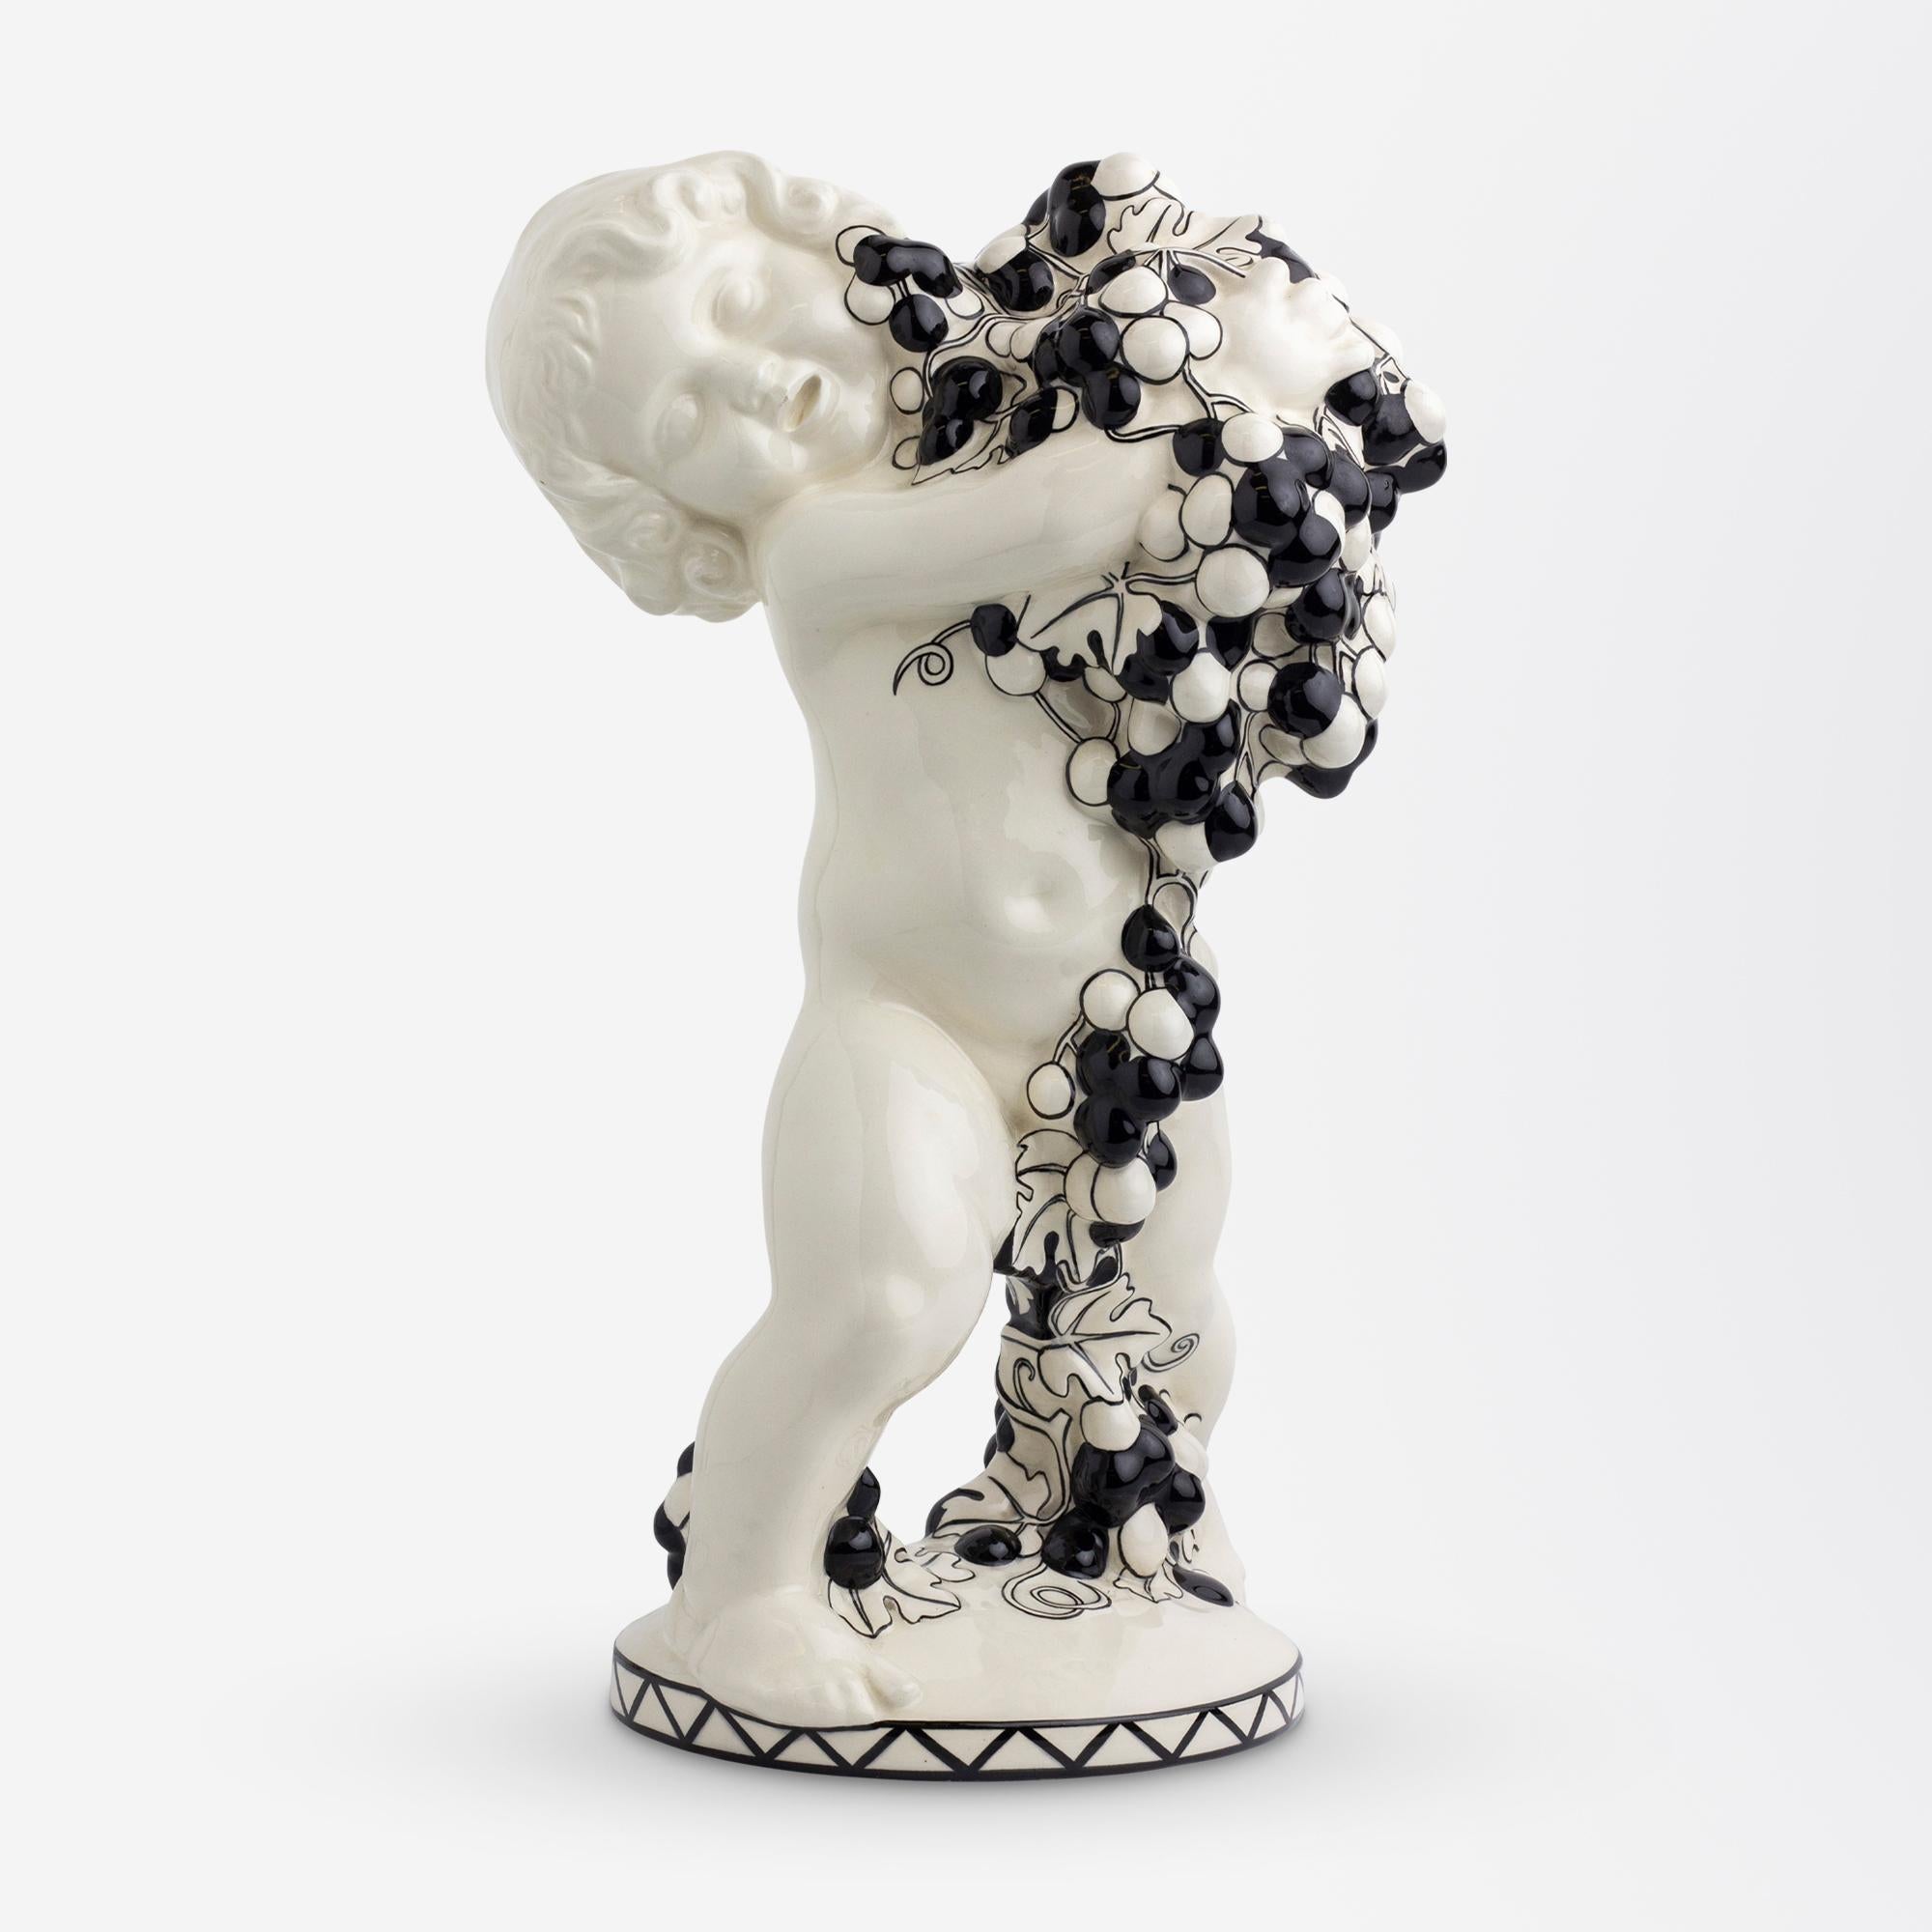 A large and rare ceramic monochromatic putto holding grapes (Autumn from 